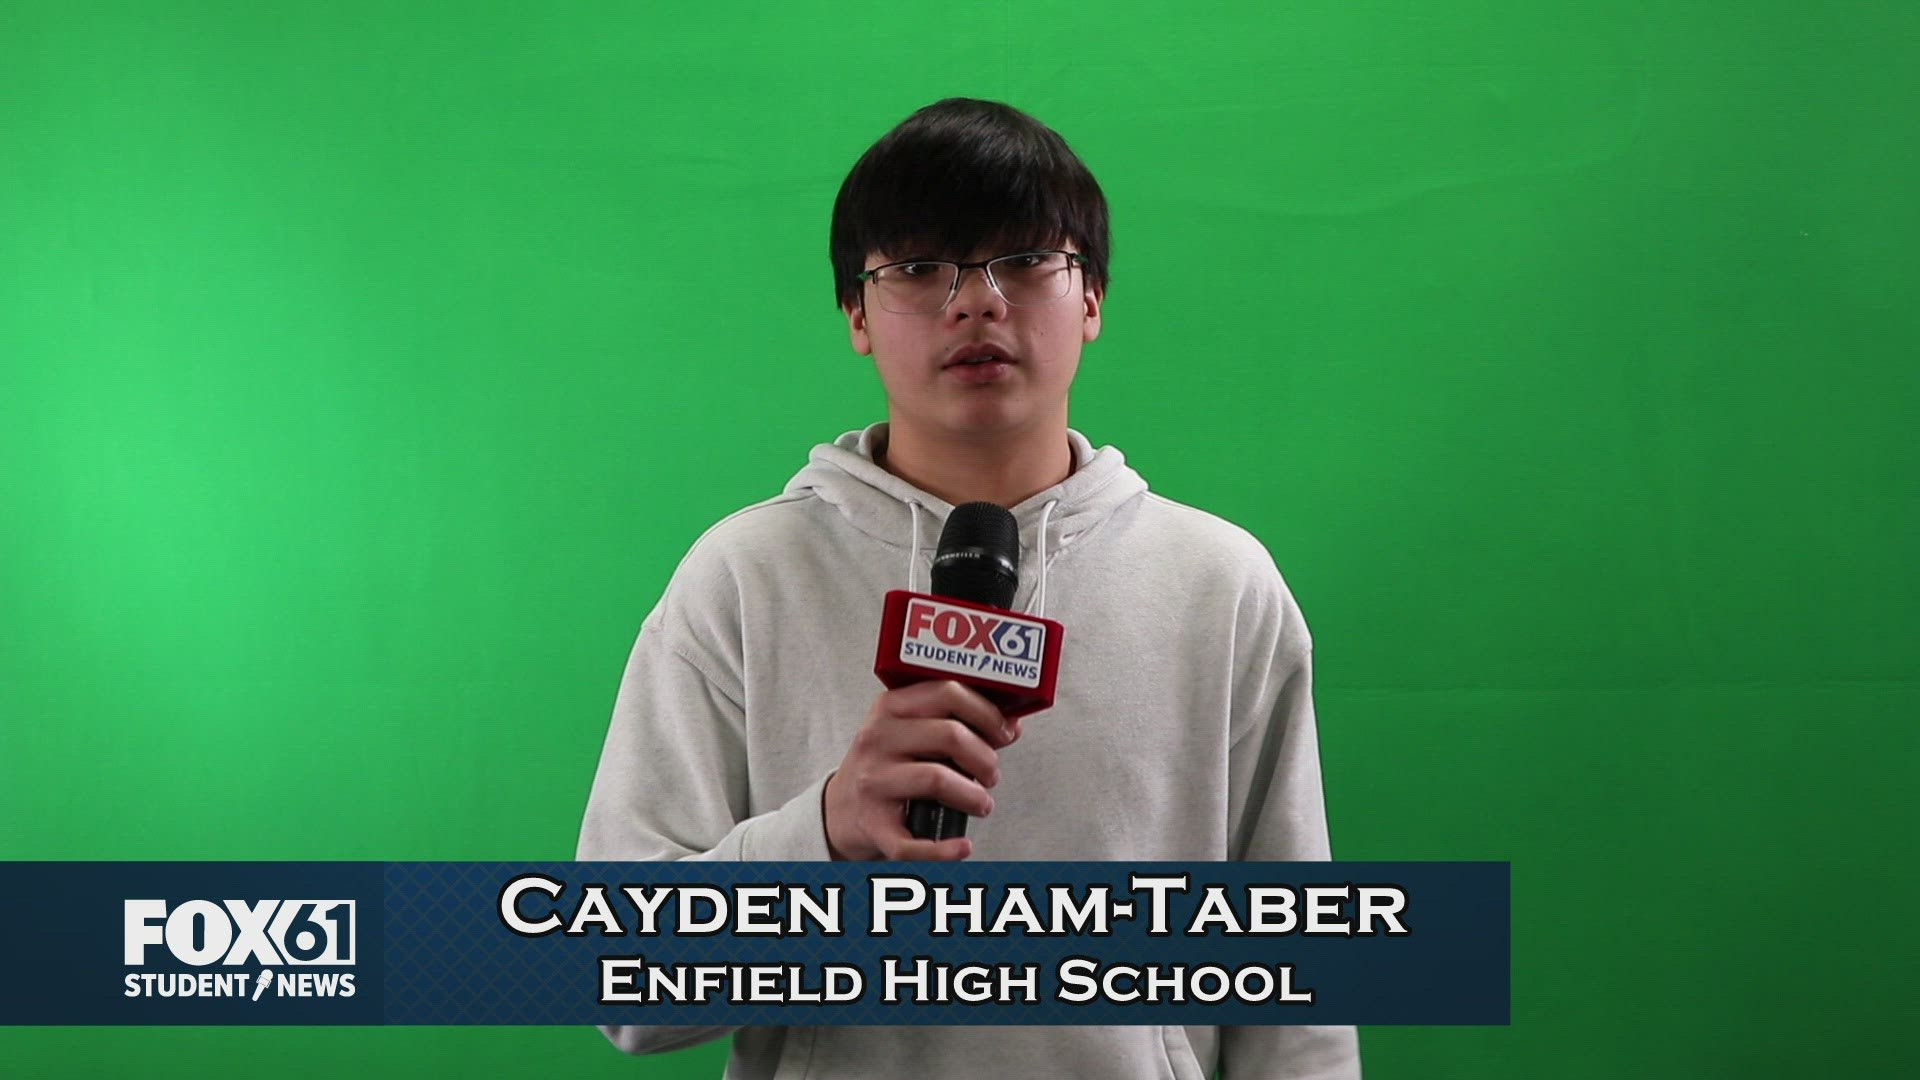 Cayden Pham-Taber, Editor and Writer